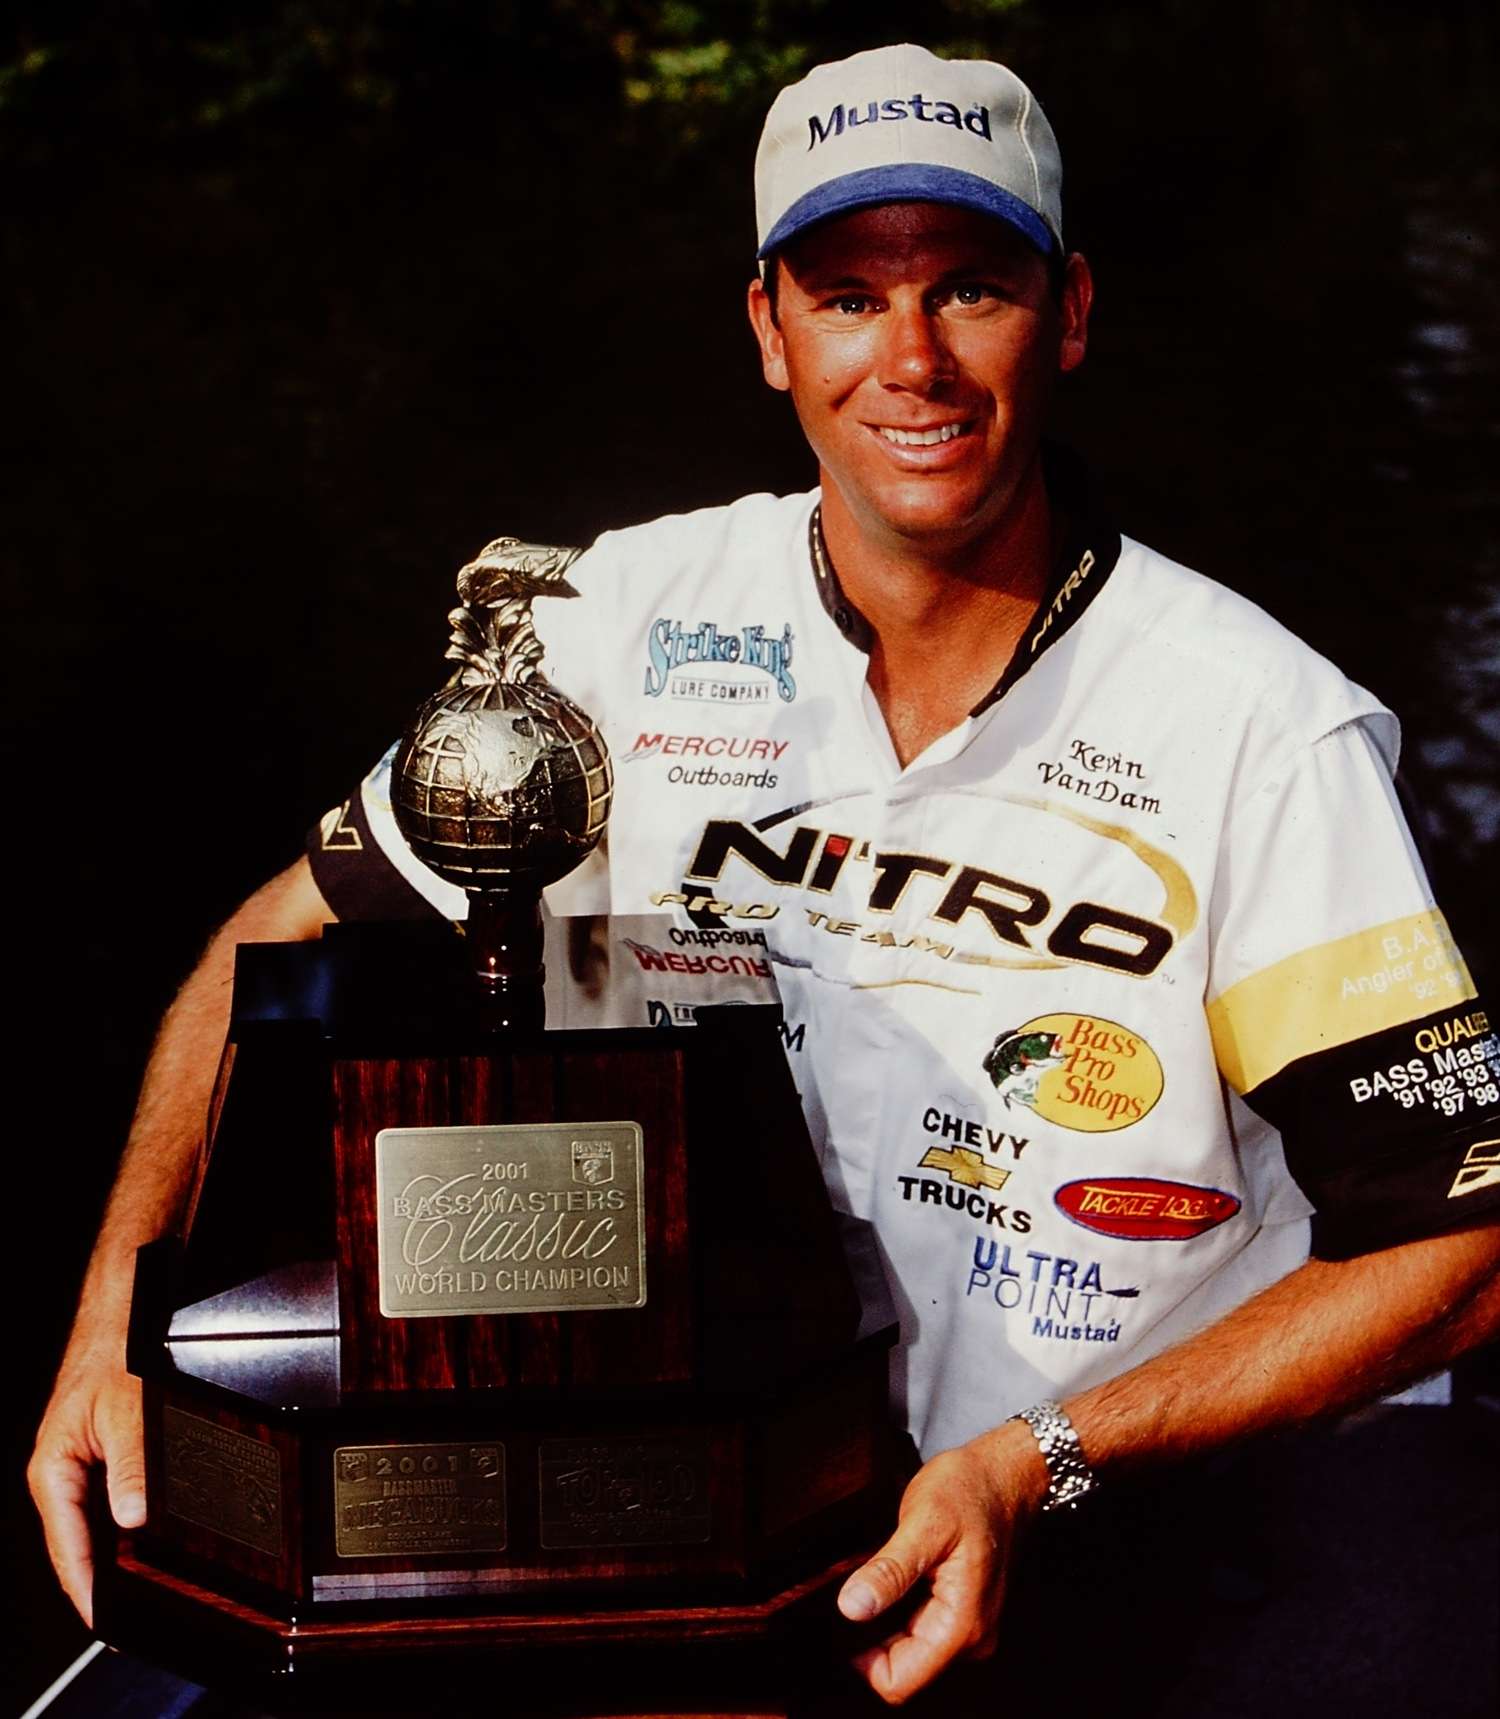 Most Classic Victories: Kevin VanDam, 4
It's a tie! Kevin VanDam has now matched Clunn's record four Classic victories. His first was in 2001, another came in 2005, and then he went back-to-back with wins in 2010 and 2011. No pro has come close to Clunn and VanDam. Three anglers â George Cochran, Bobby Murray and Hank Parker â have two wins, and all three are retired, so don't expect a third four-timer anytime soon.